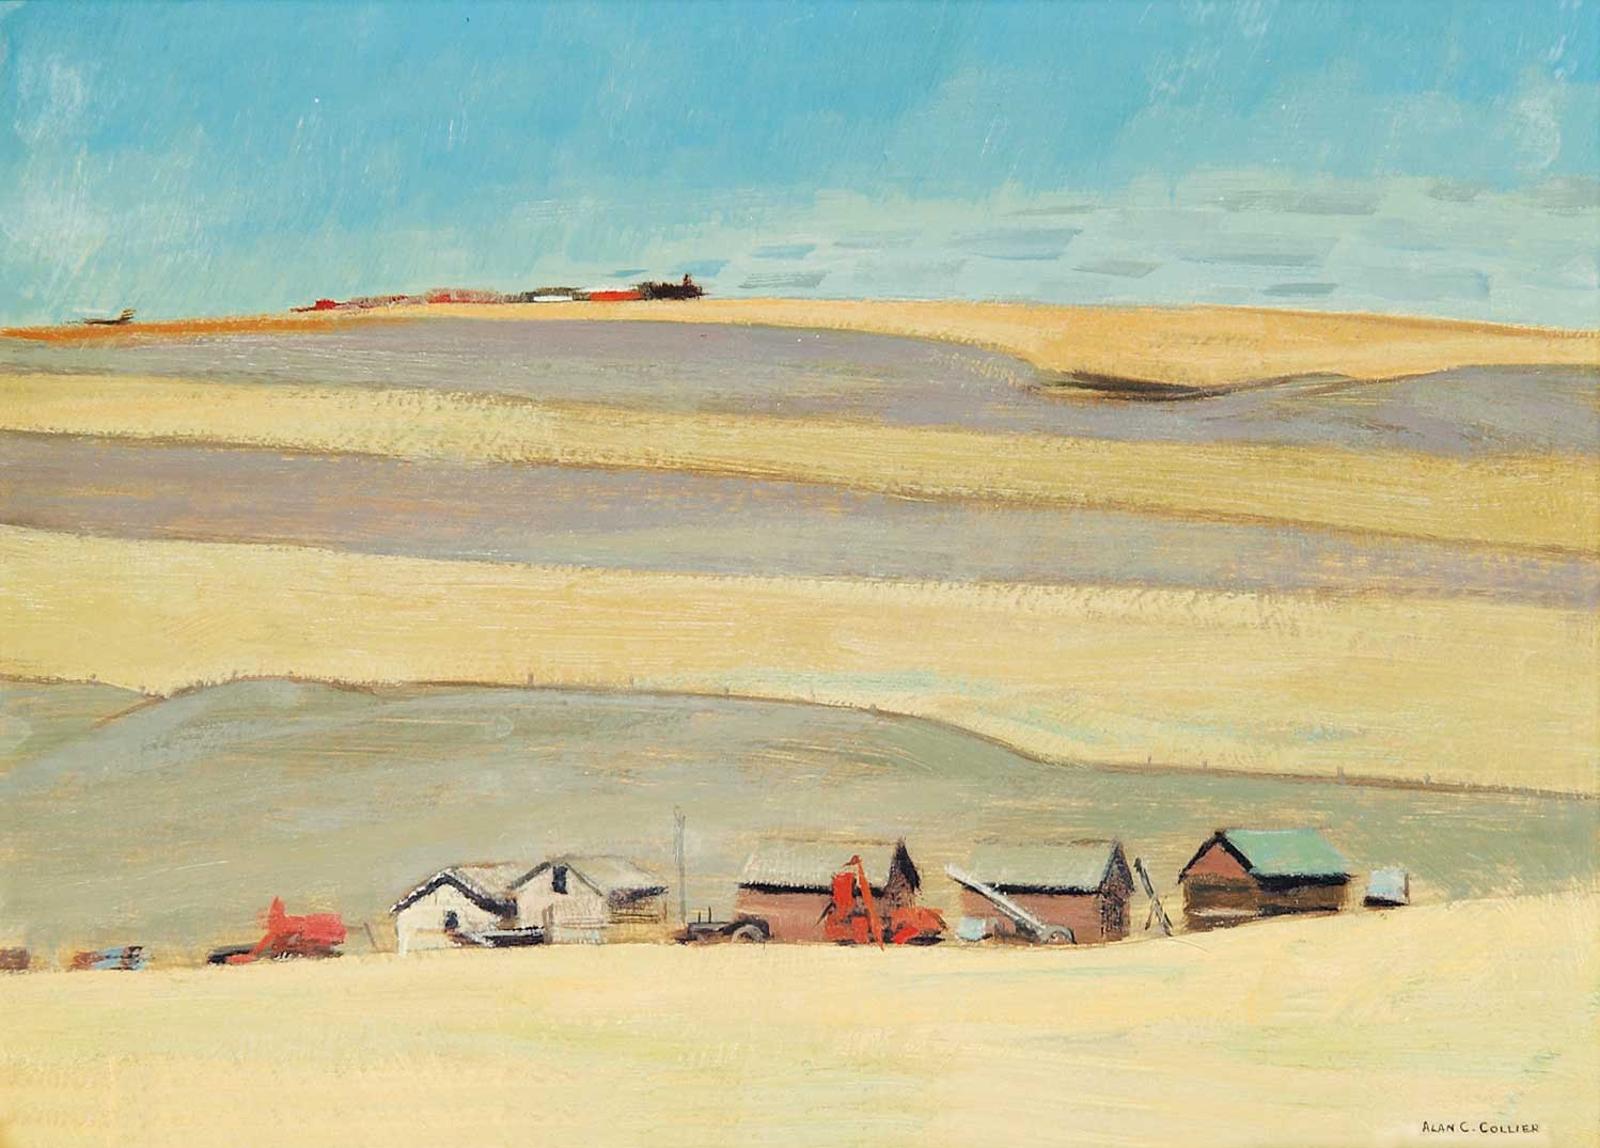 Alan Caswell Collier (1911-1990) - Just South of Swift Current, Sask